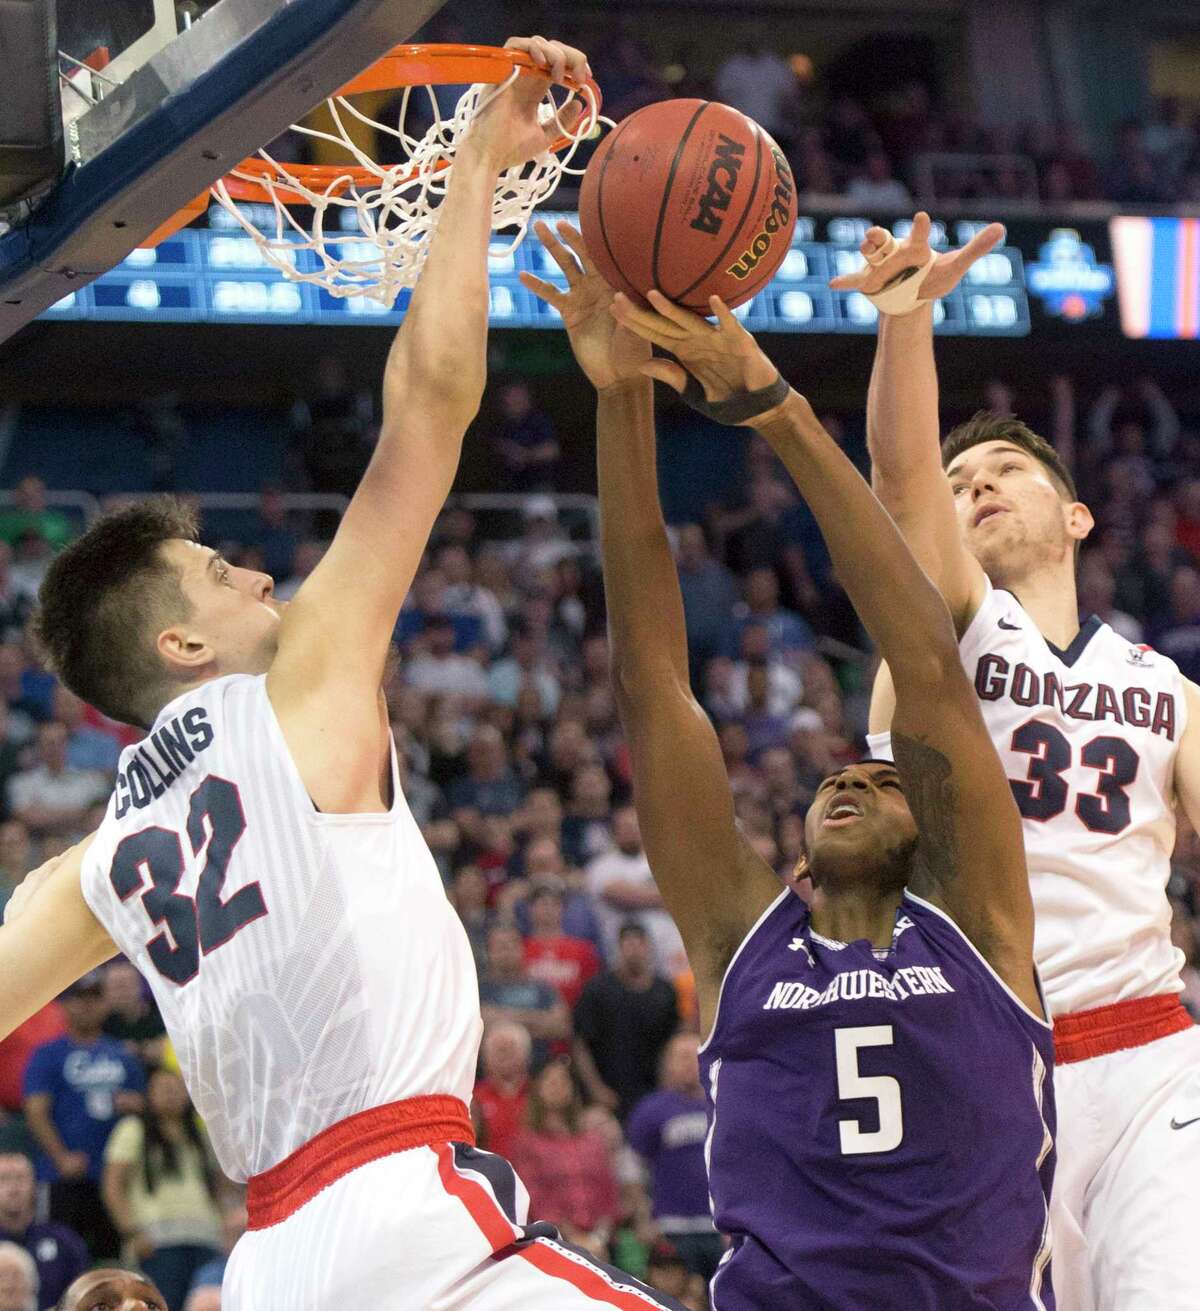 Gonzaga forward Zach Collins sticks his hand through the hoop to punch out a shot by Northwestern center Dererk Pardon, and he got away with it.